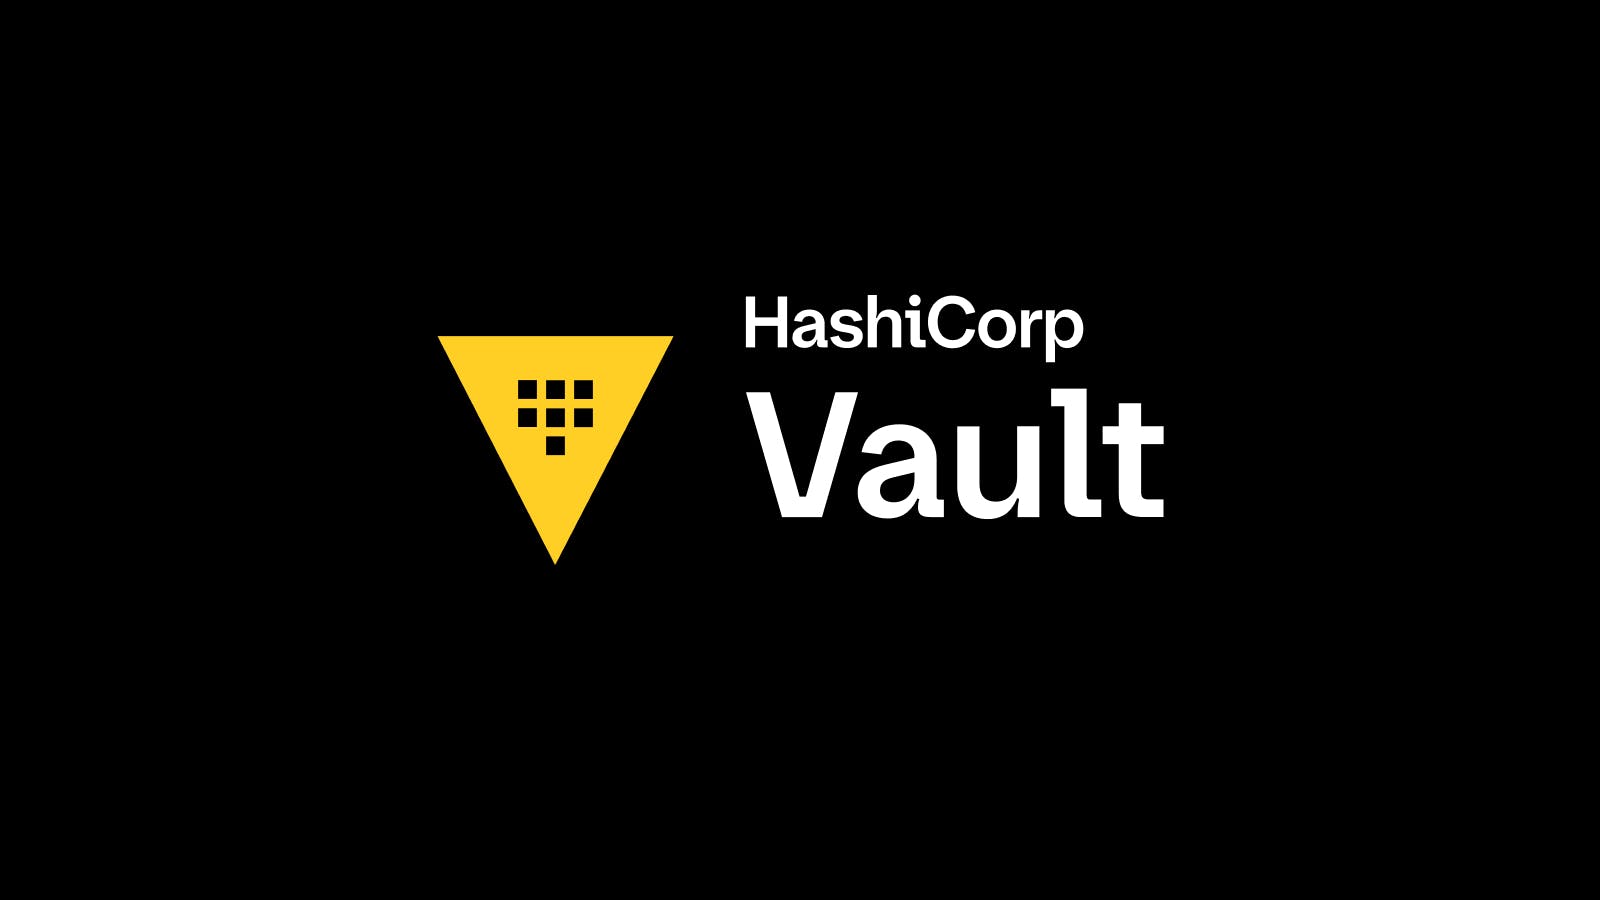 HashiCorp Vault 1.10 Achieves FIPS 140-2 Compliance